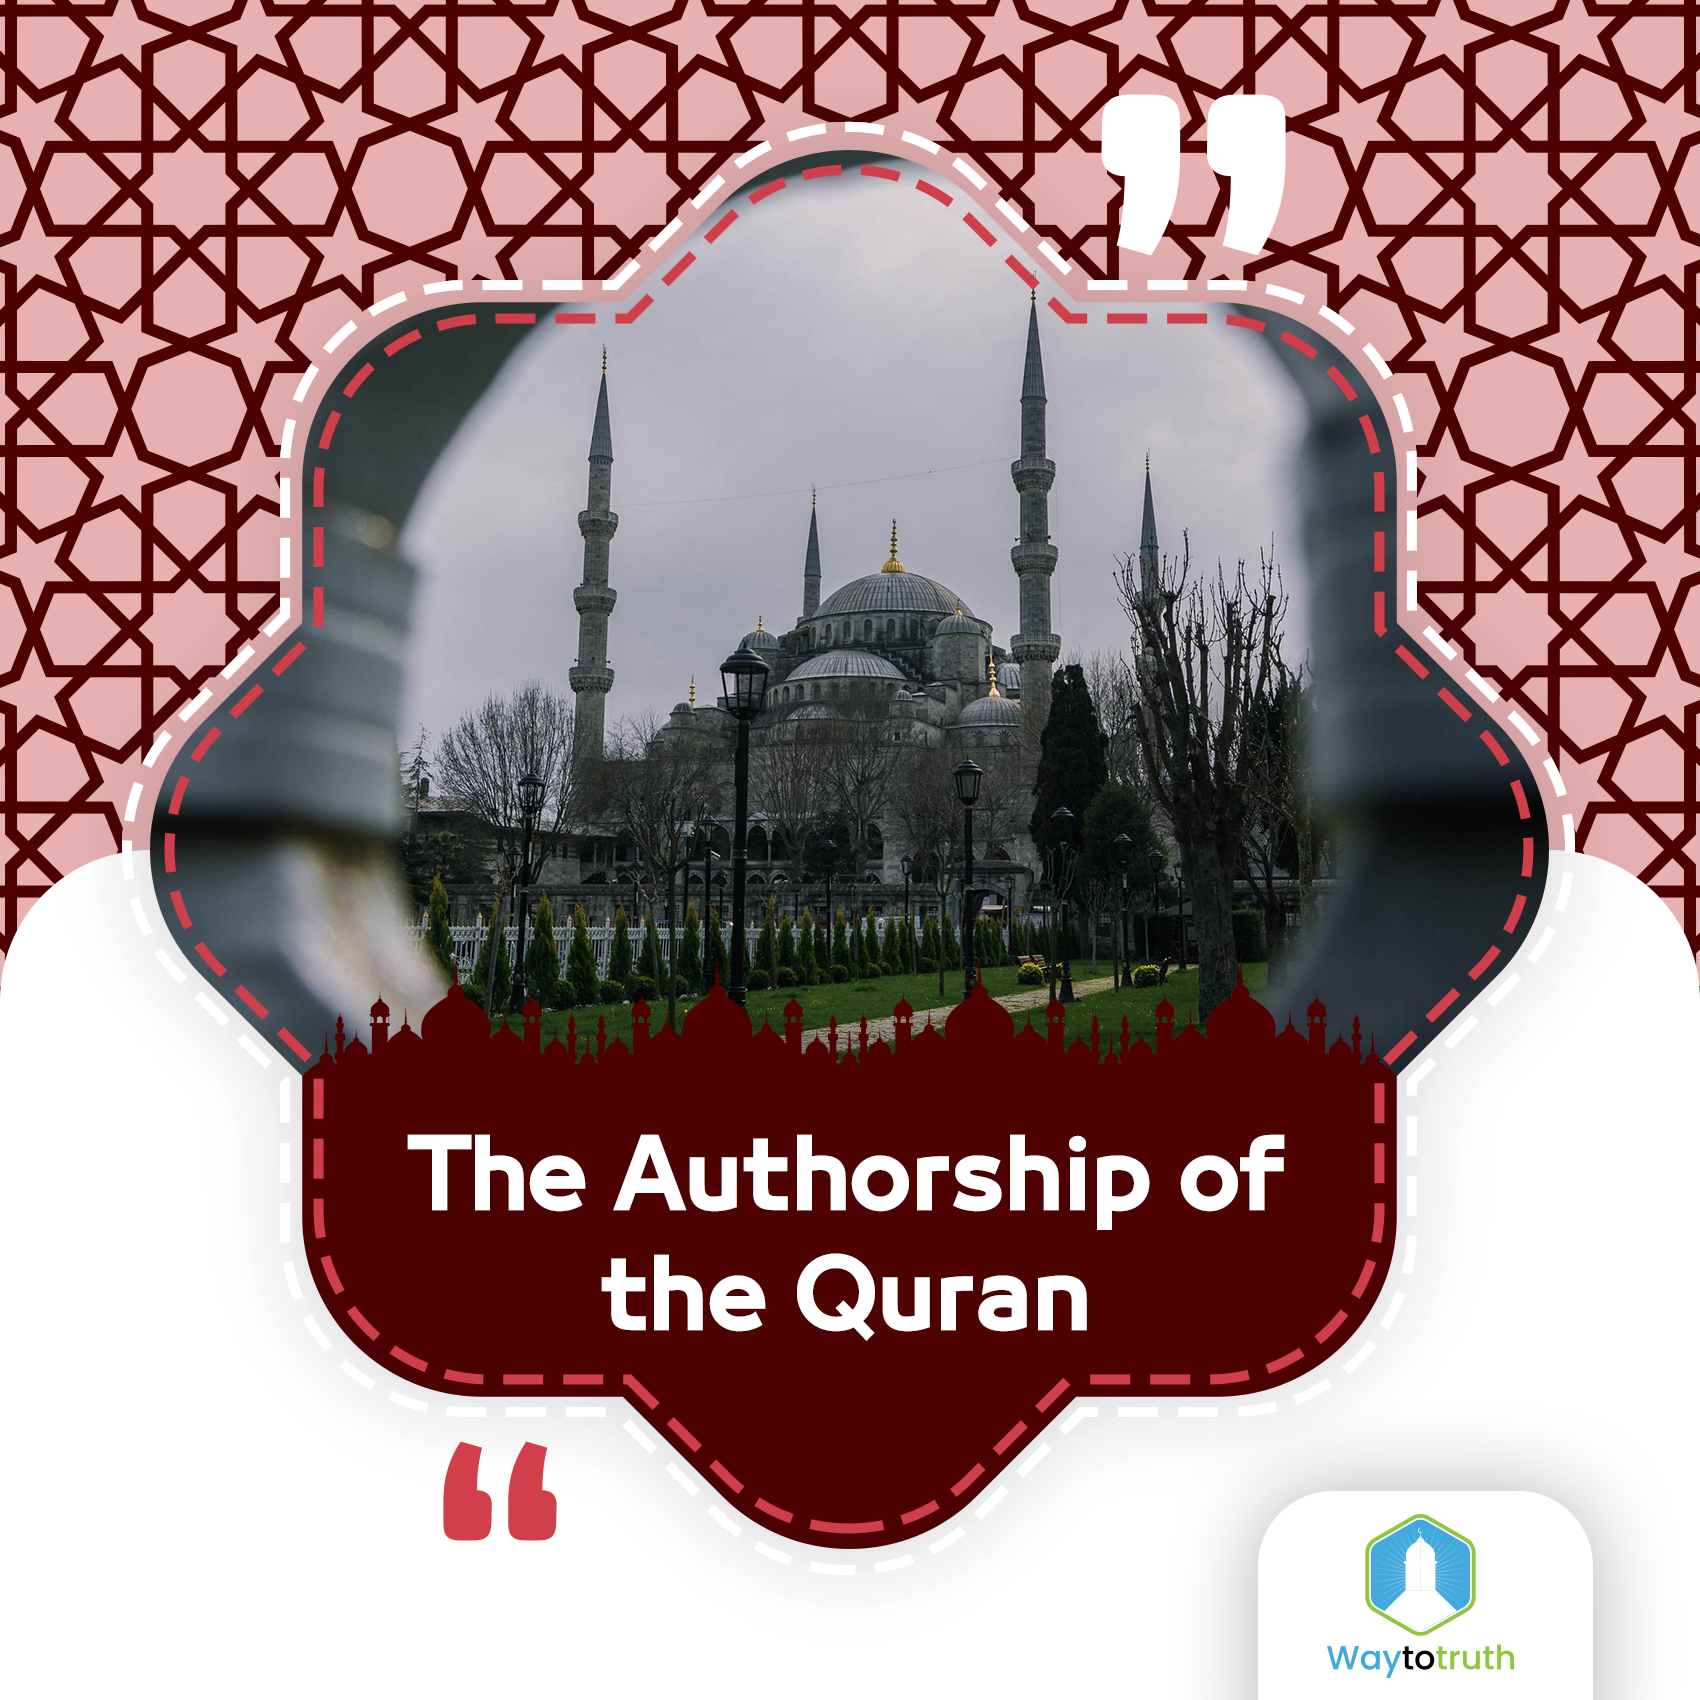 The Authorship of the Quran